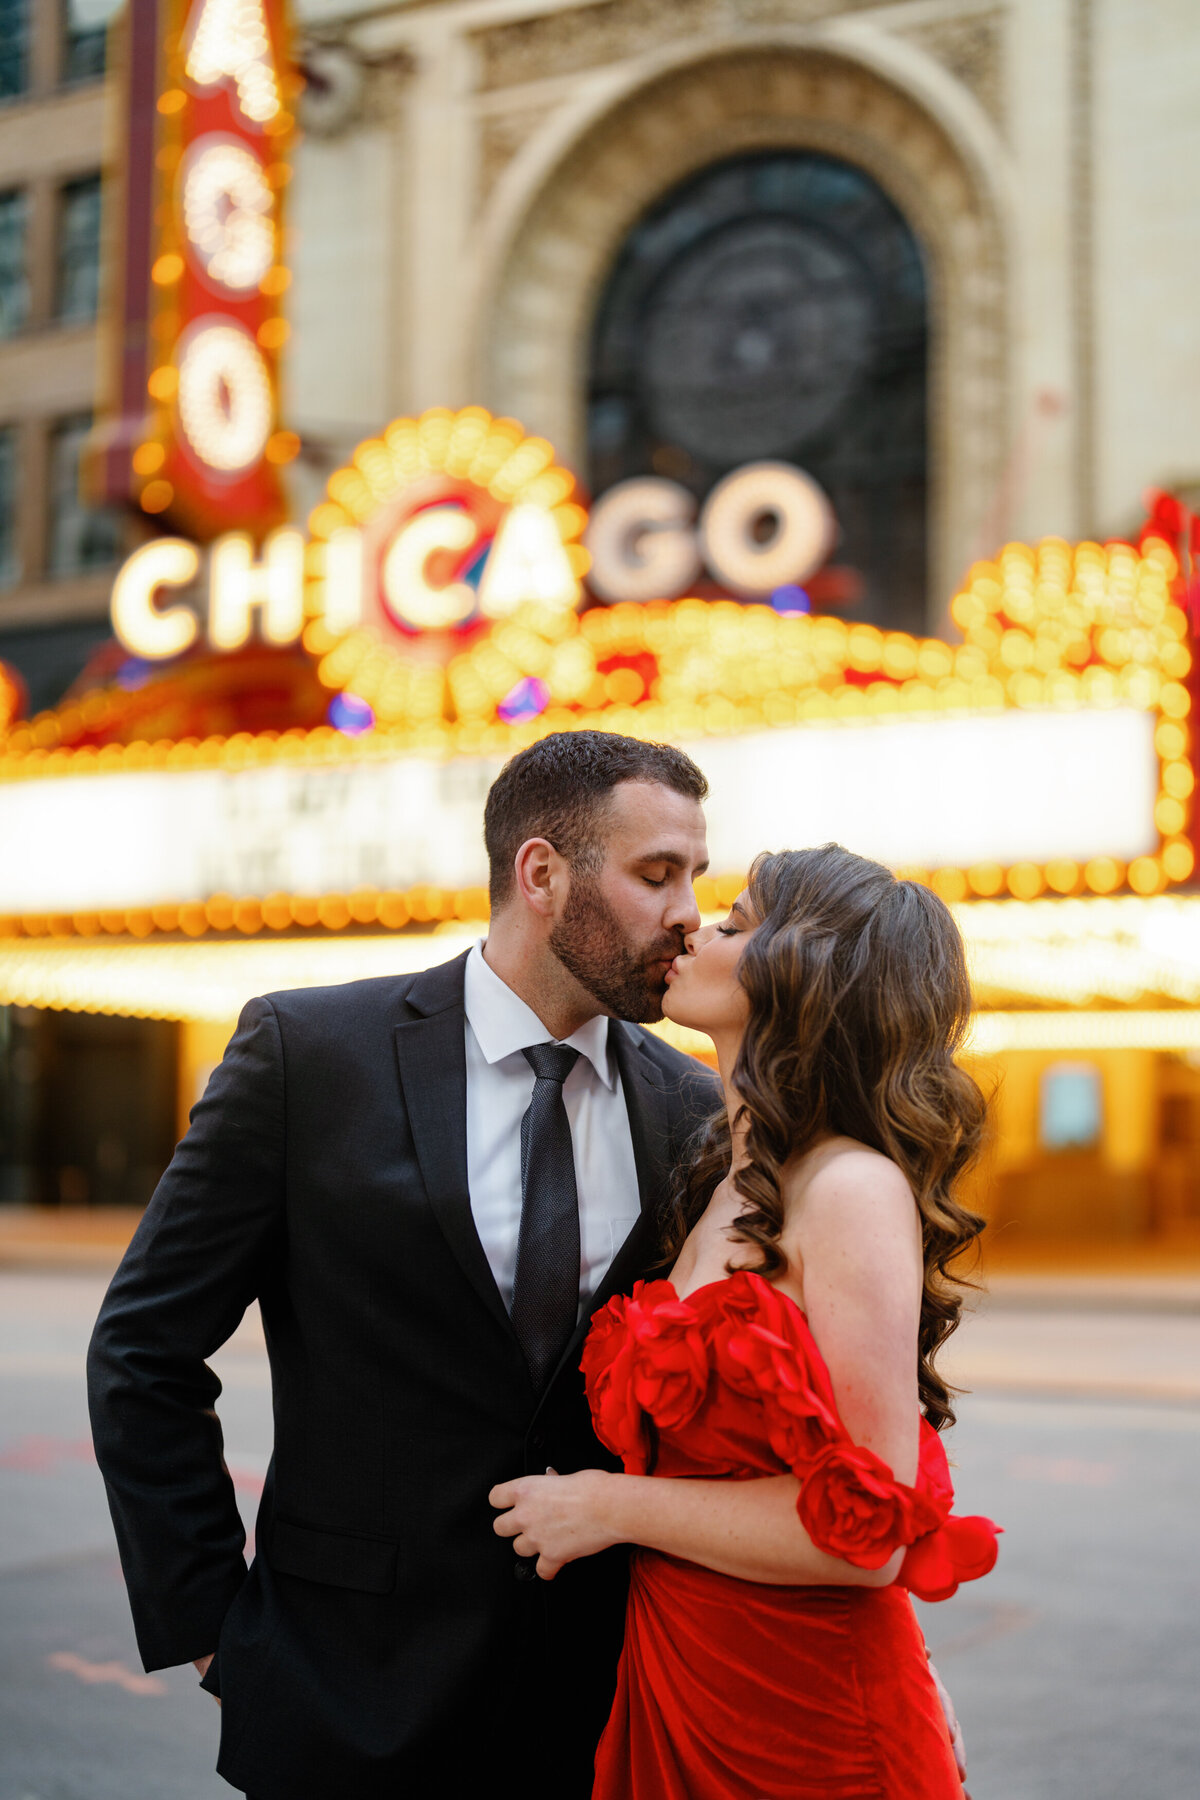 Aspen-Avenue-Chicago-Wedding-Photographer-Union-Station-Chicago-Theater-Engagement-Session-Timeless-Romantic-Red-Dress-Editorial-Stemming-From-Love-Bry-Jean-Artistry-The-Bridal-Collective-True-to-color-Luxury-FAV-125